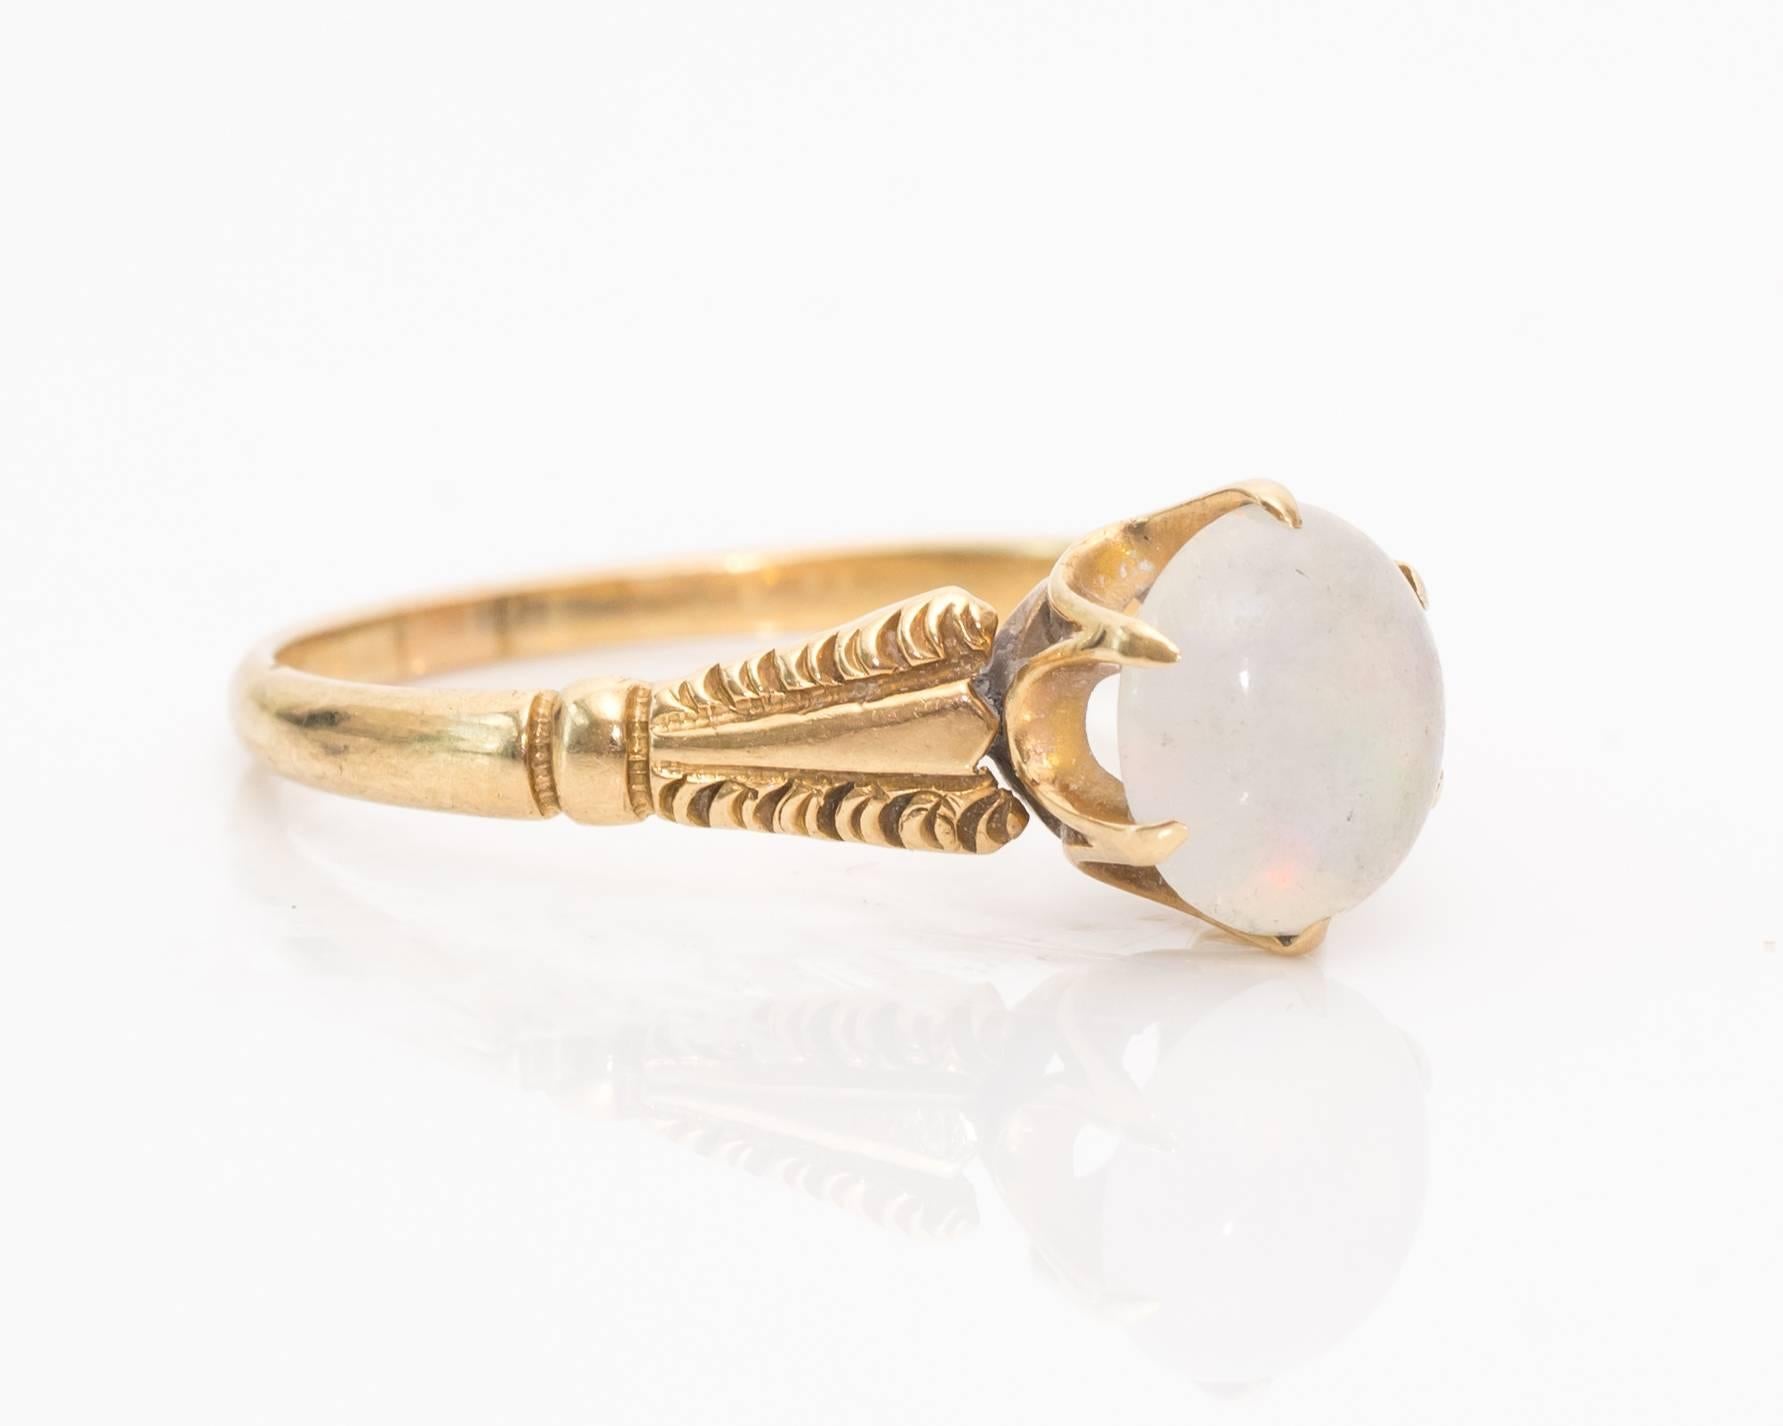 1930s Art Deco Round White Opal 14 Karat and 9 Karat Gold Ring. The large center white opal has stunning red, pink, purple, green, and yellow color play. The stone is mounted in a six-prong talon-prong frame with U-shaped galleries underneath to